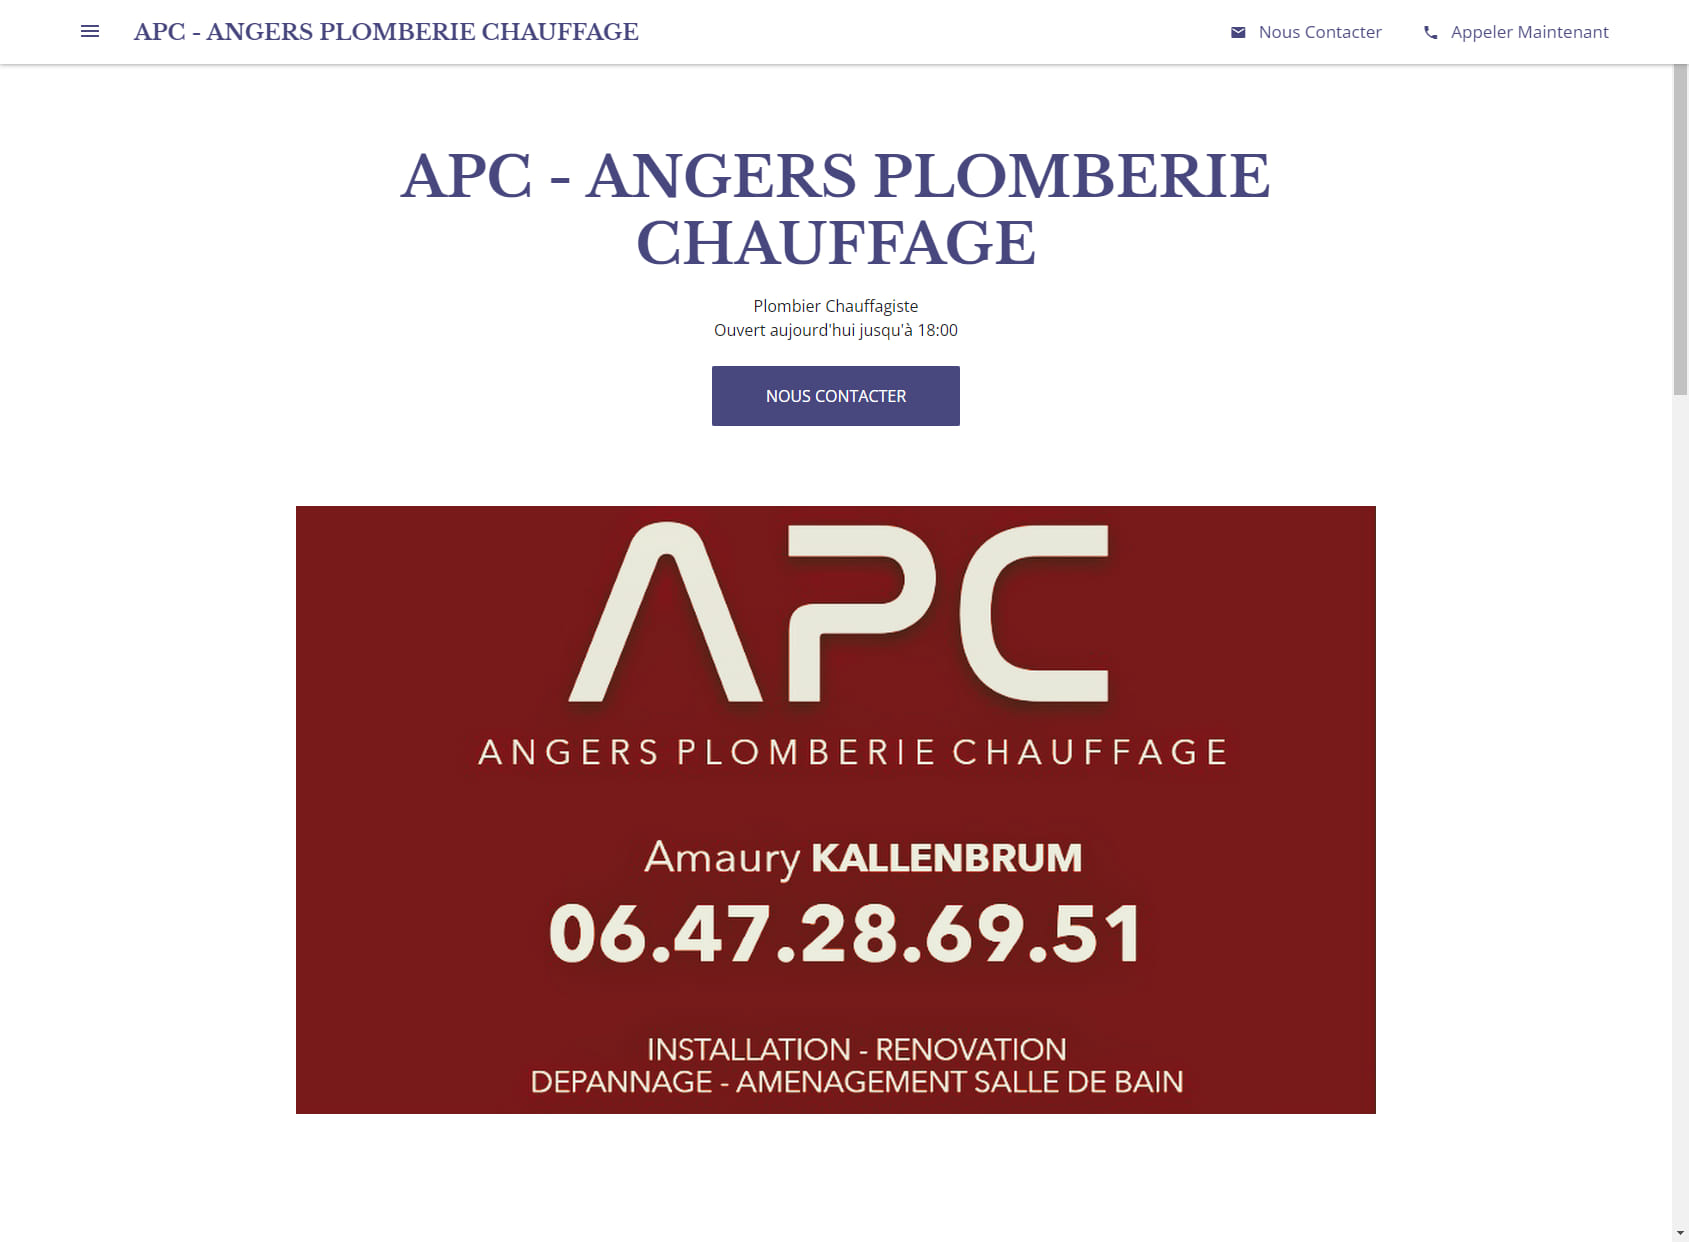 APC - ANGERS PLOMBERIE CHAUFFAGE